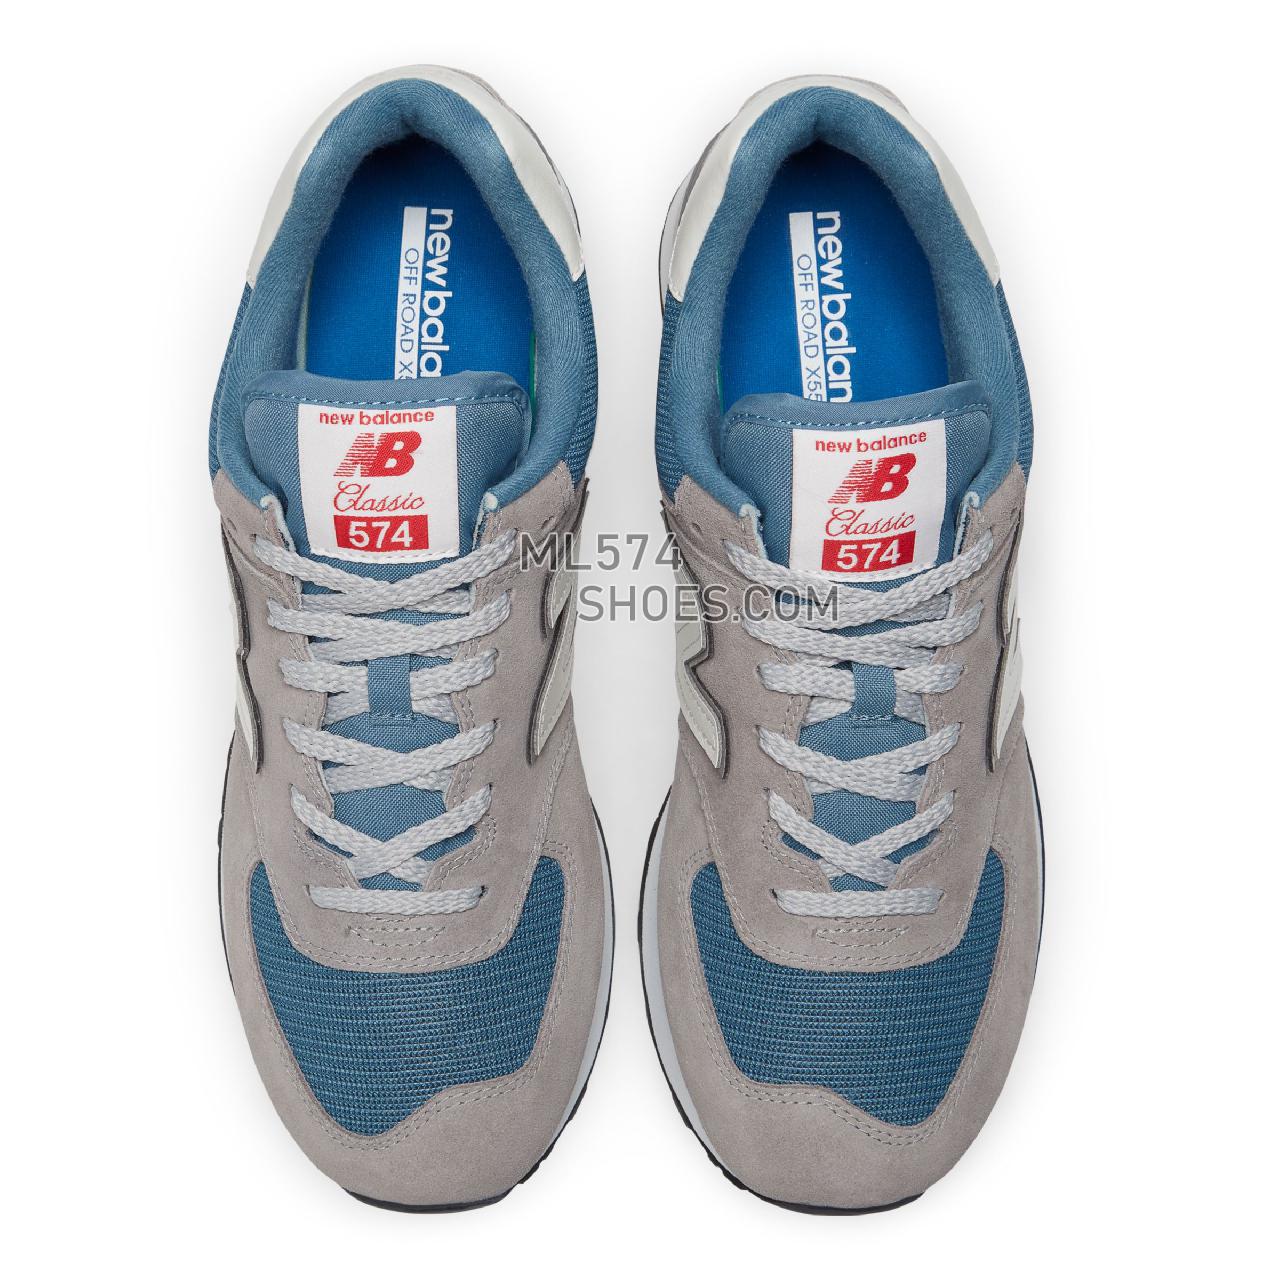 New Balance 574v2 - Unisex Men's Women's Classic Sneakers - Grey with Blue - ML574OW2